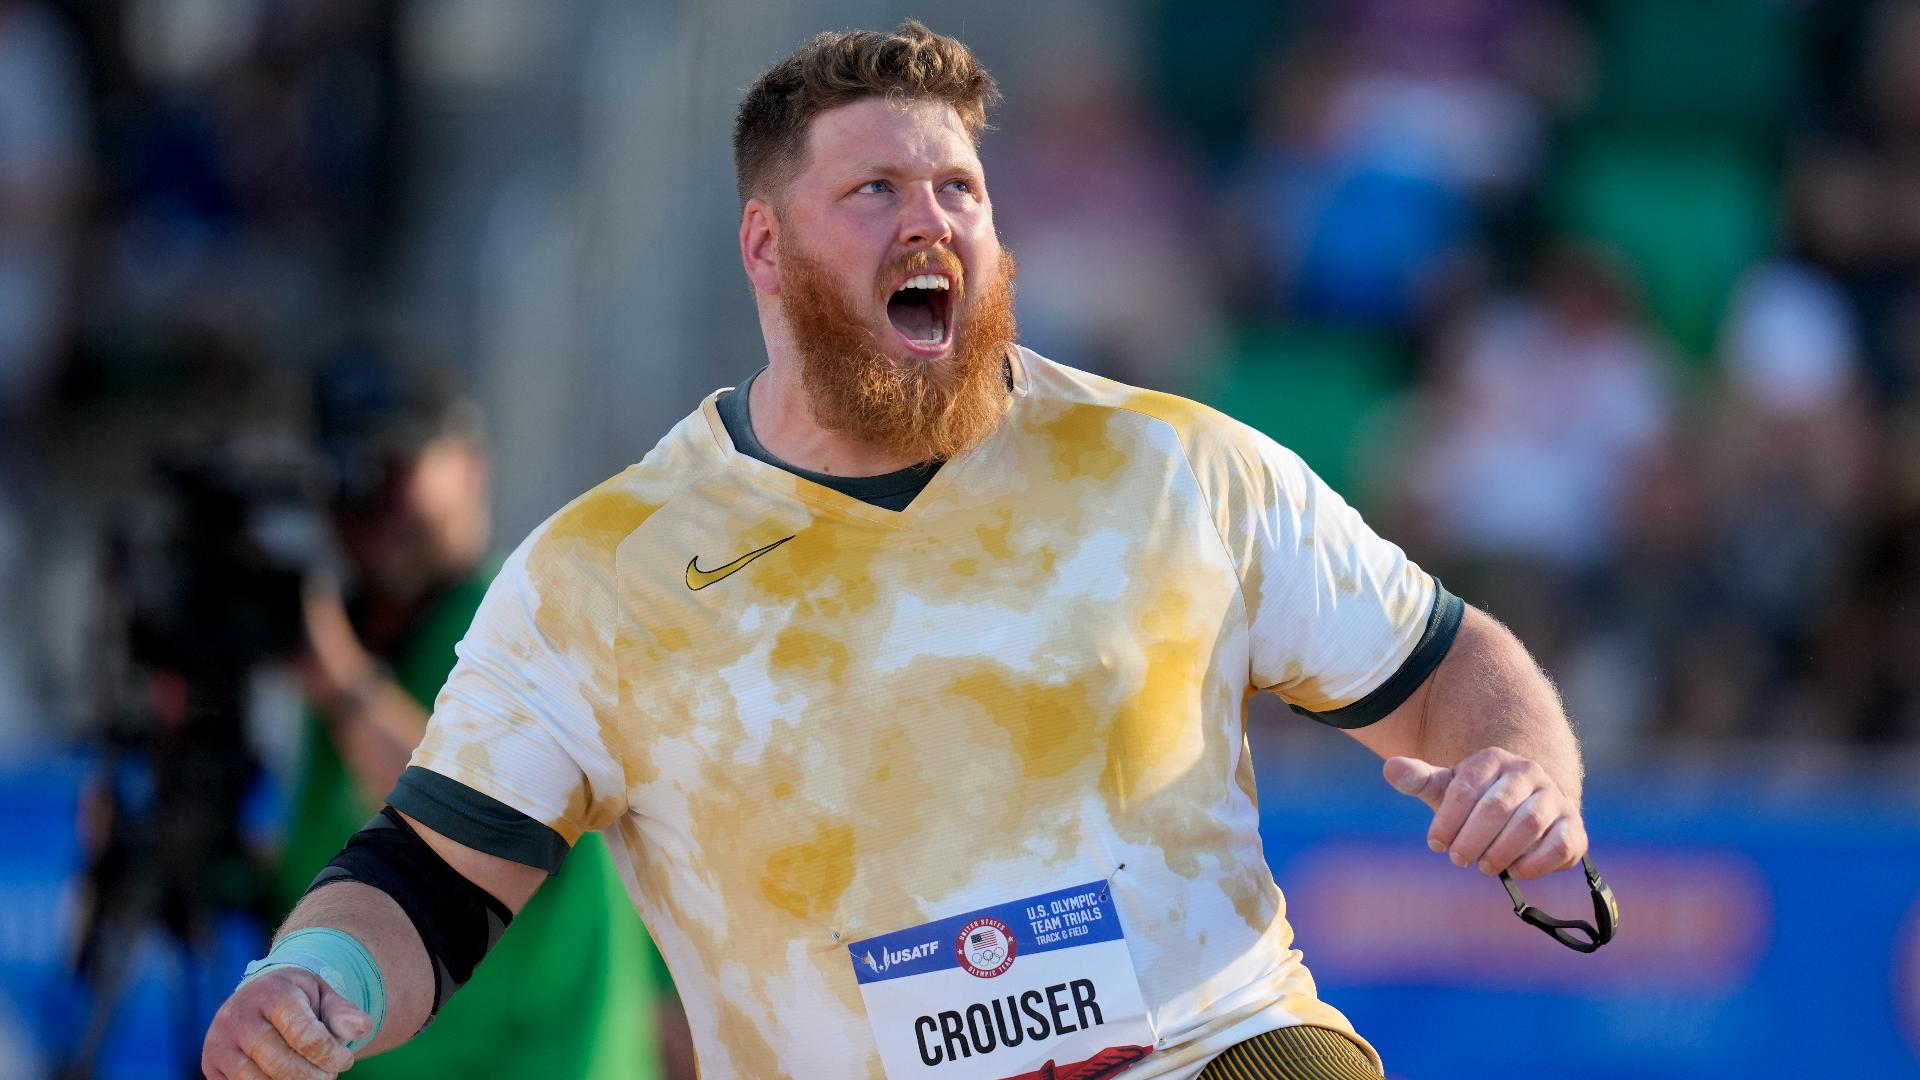 Ryan Crouser, raised in Boring, Oregon, spoke to KGW after placing first in the shot put final at the U.S. Olympic Track and Field Trials in Eugene on Saturday.